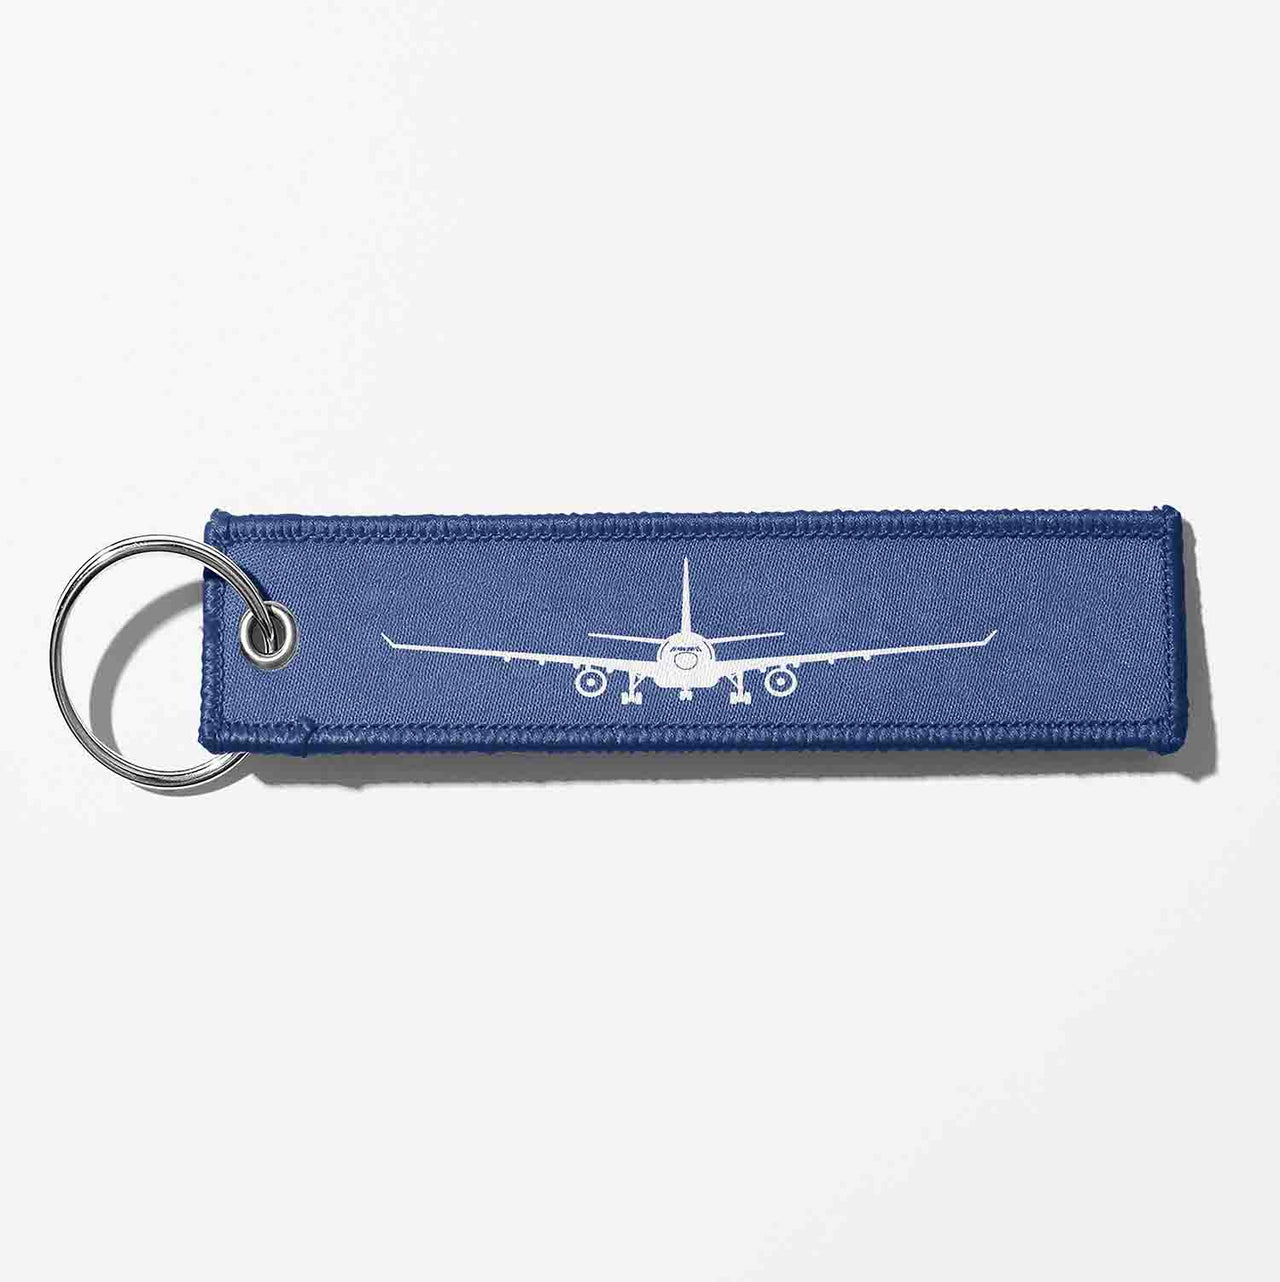 Airbus A330 Silhouette Designed Key Chains